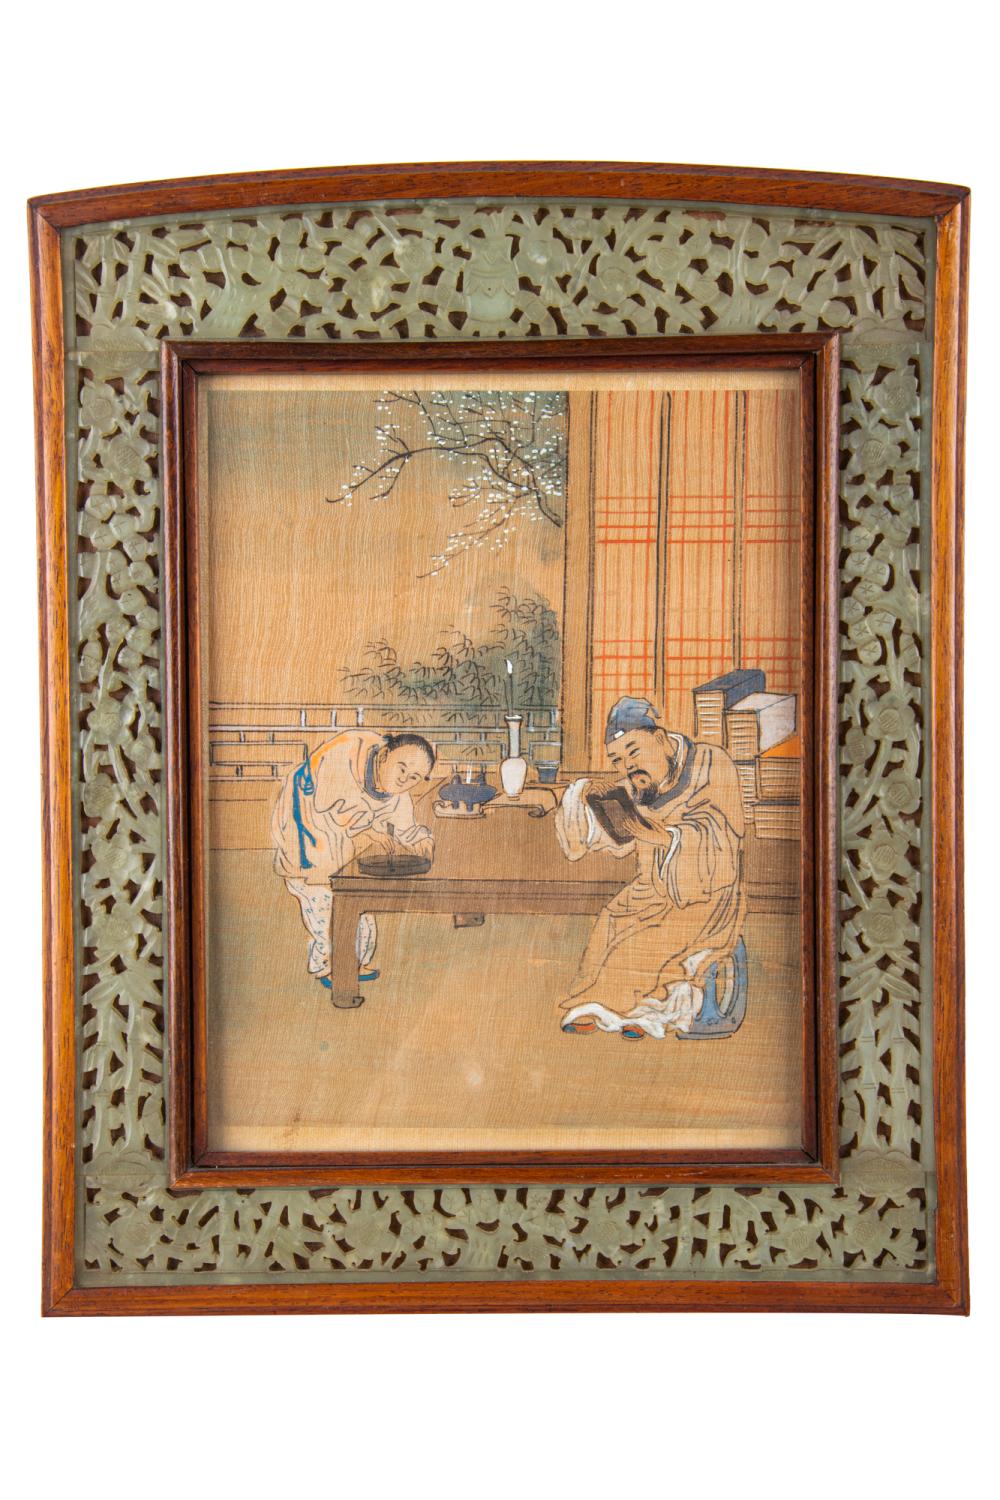 CHINESE TABLE FRAMEwith carved